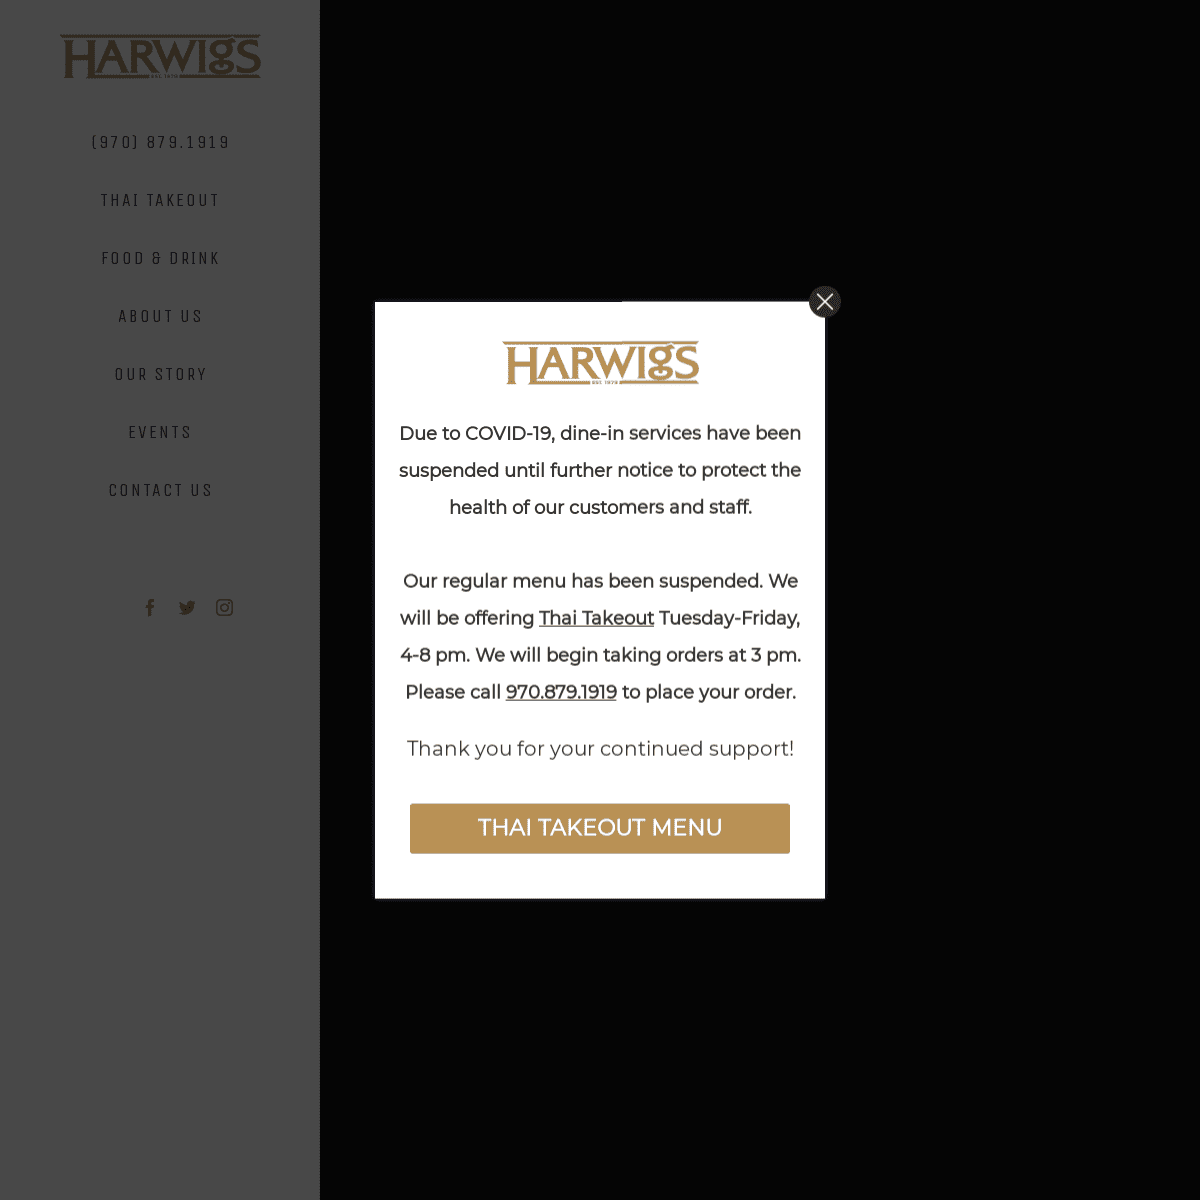 A complete backup of harwigs.com